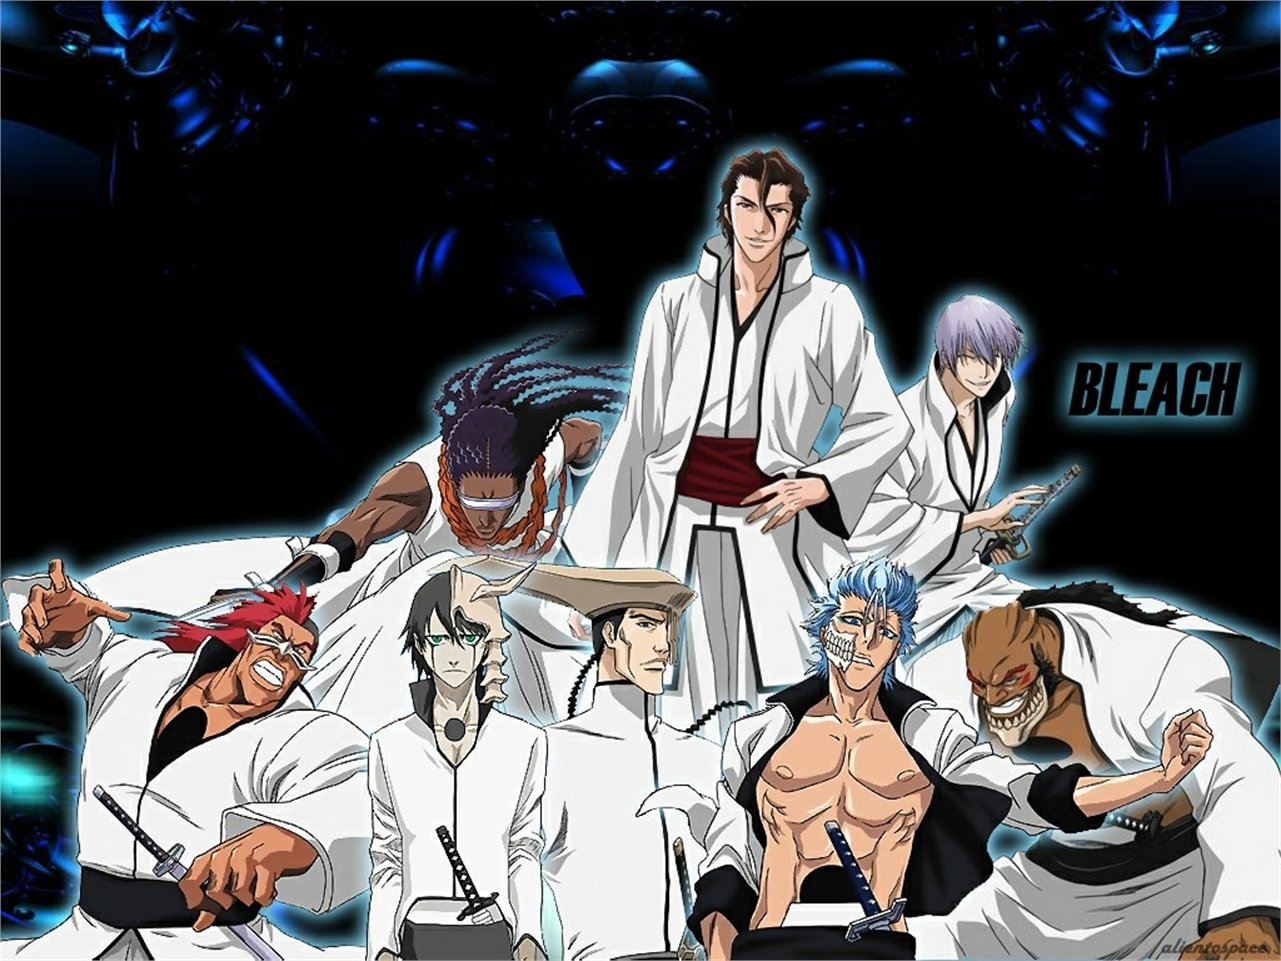 Bleach Image - ID: 449020 - Image Abyss